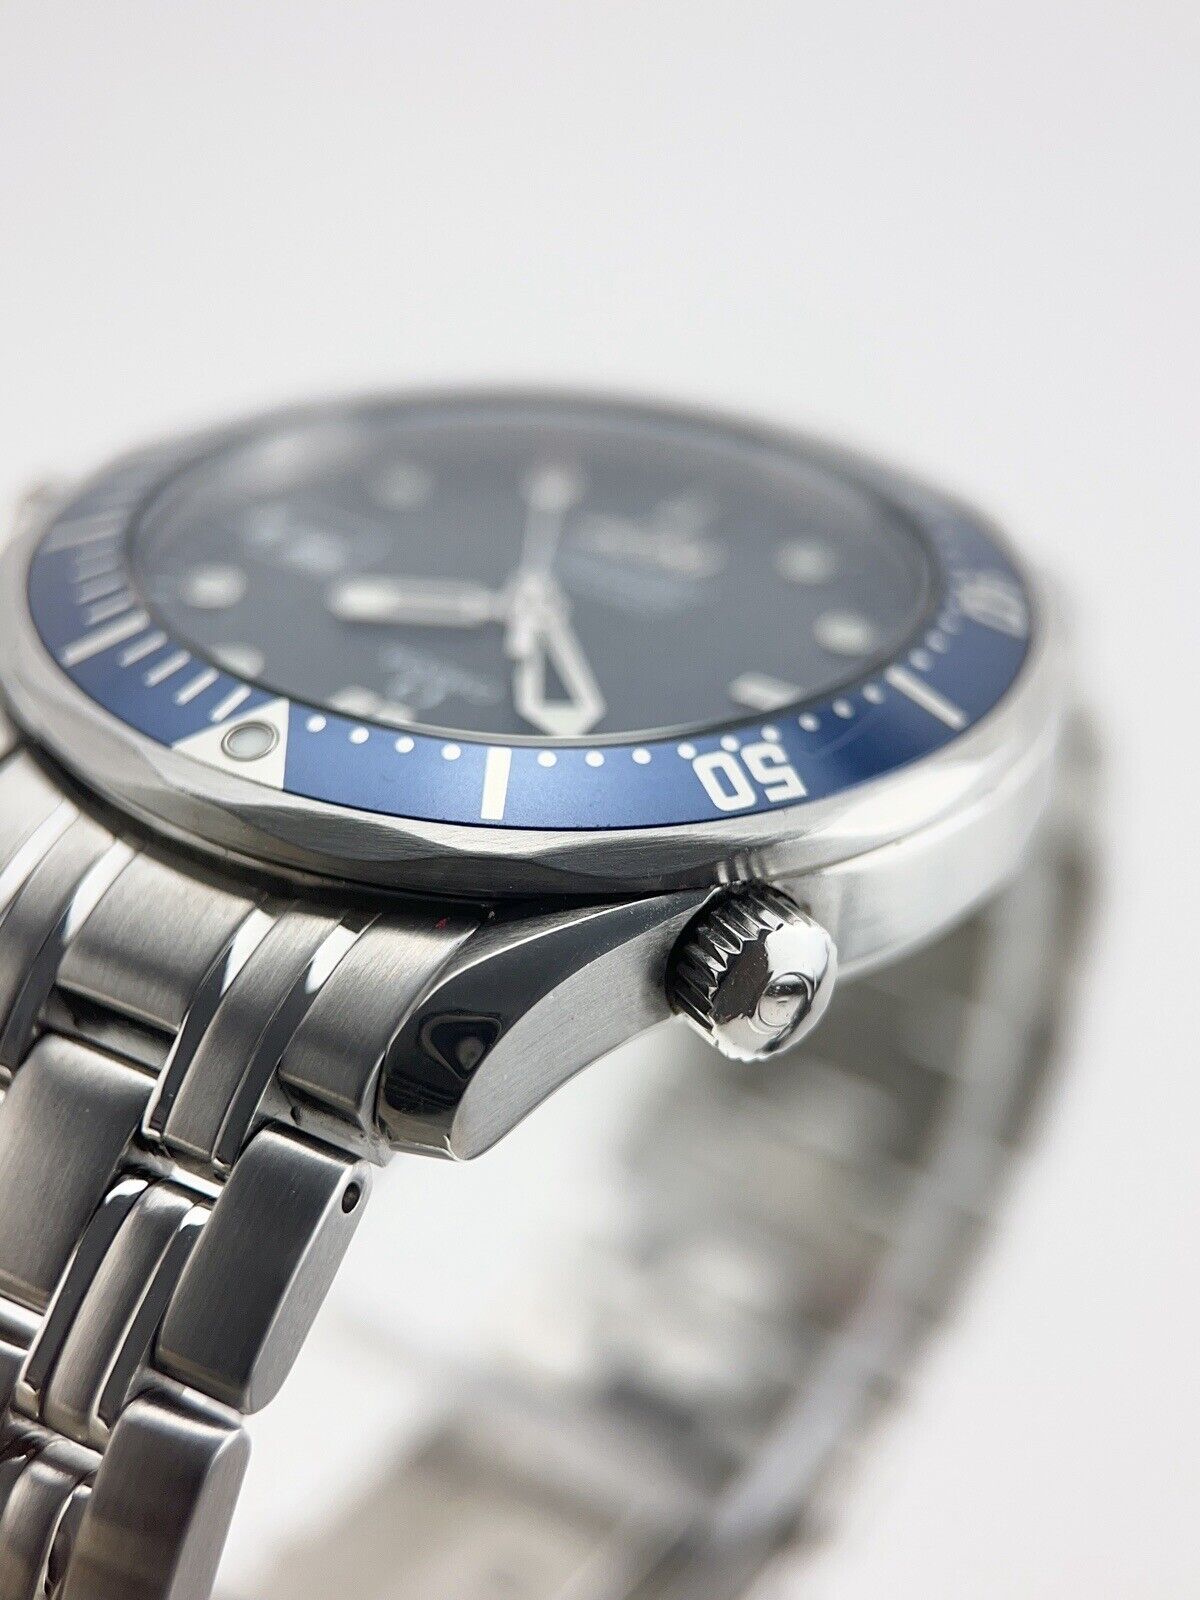 Omega Seamaster Diver 300m Steel Blue 41mm Automatic Men’s Watch 2537.80.00